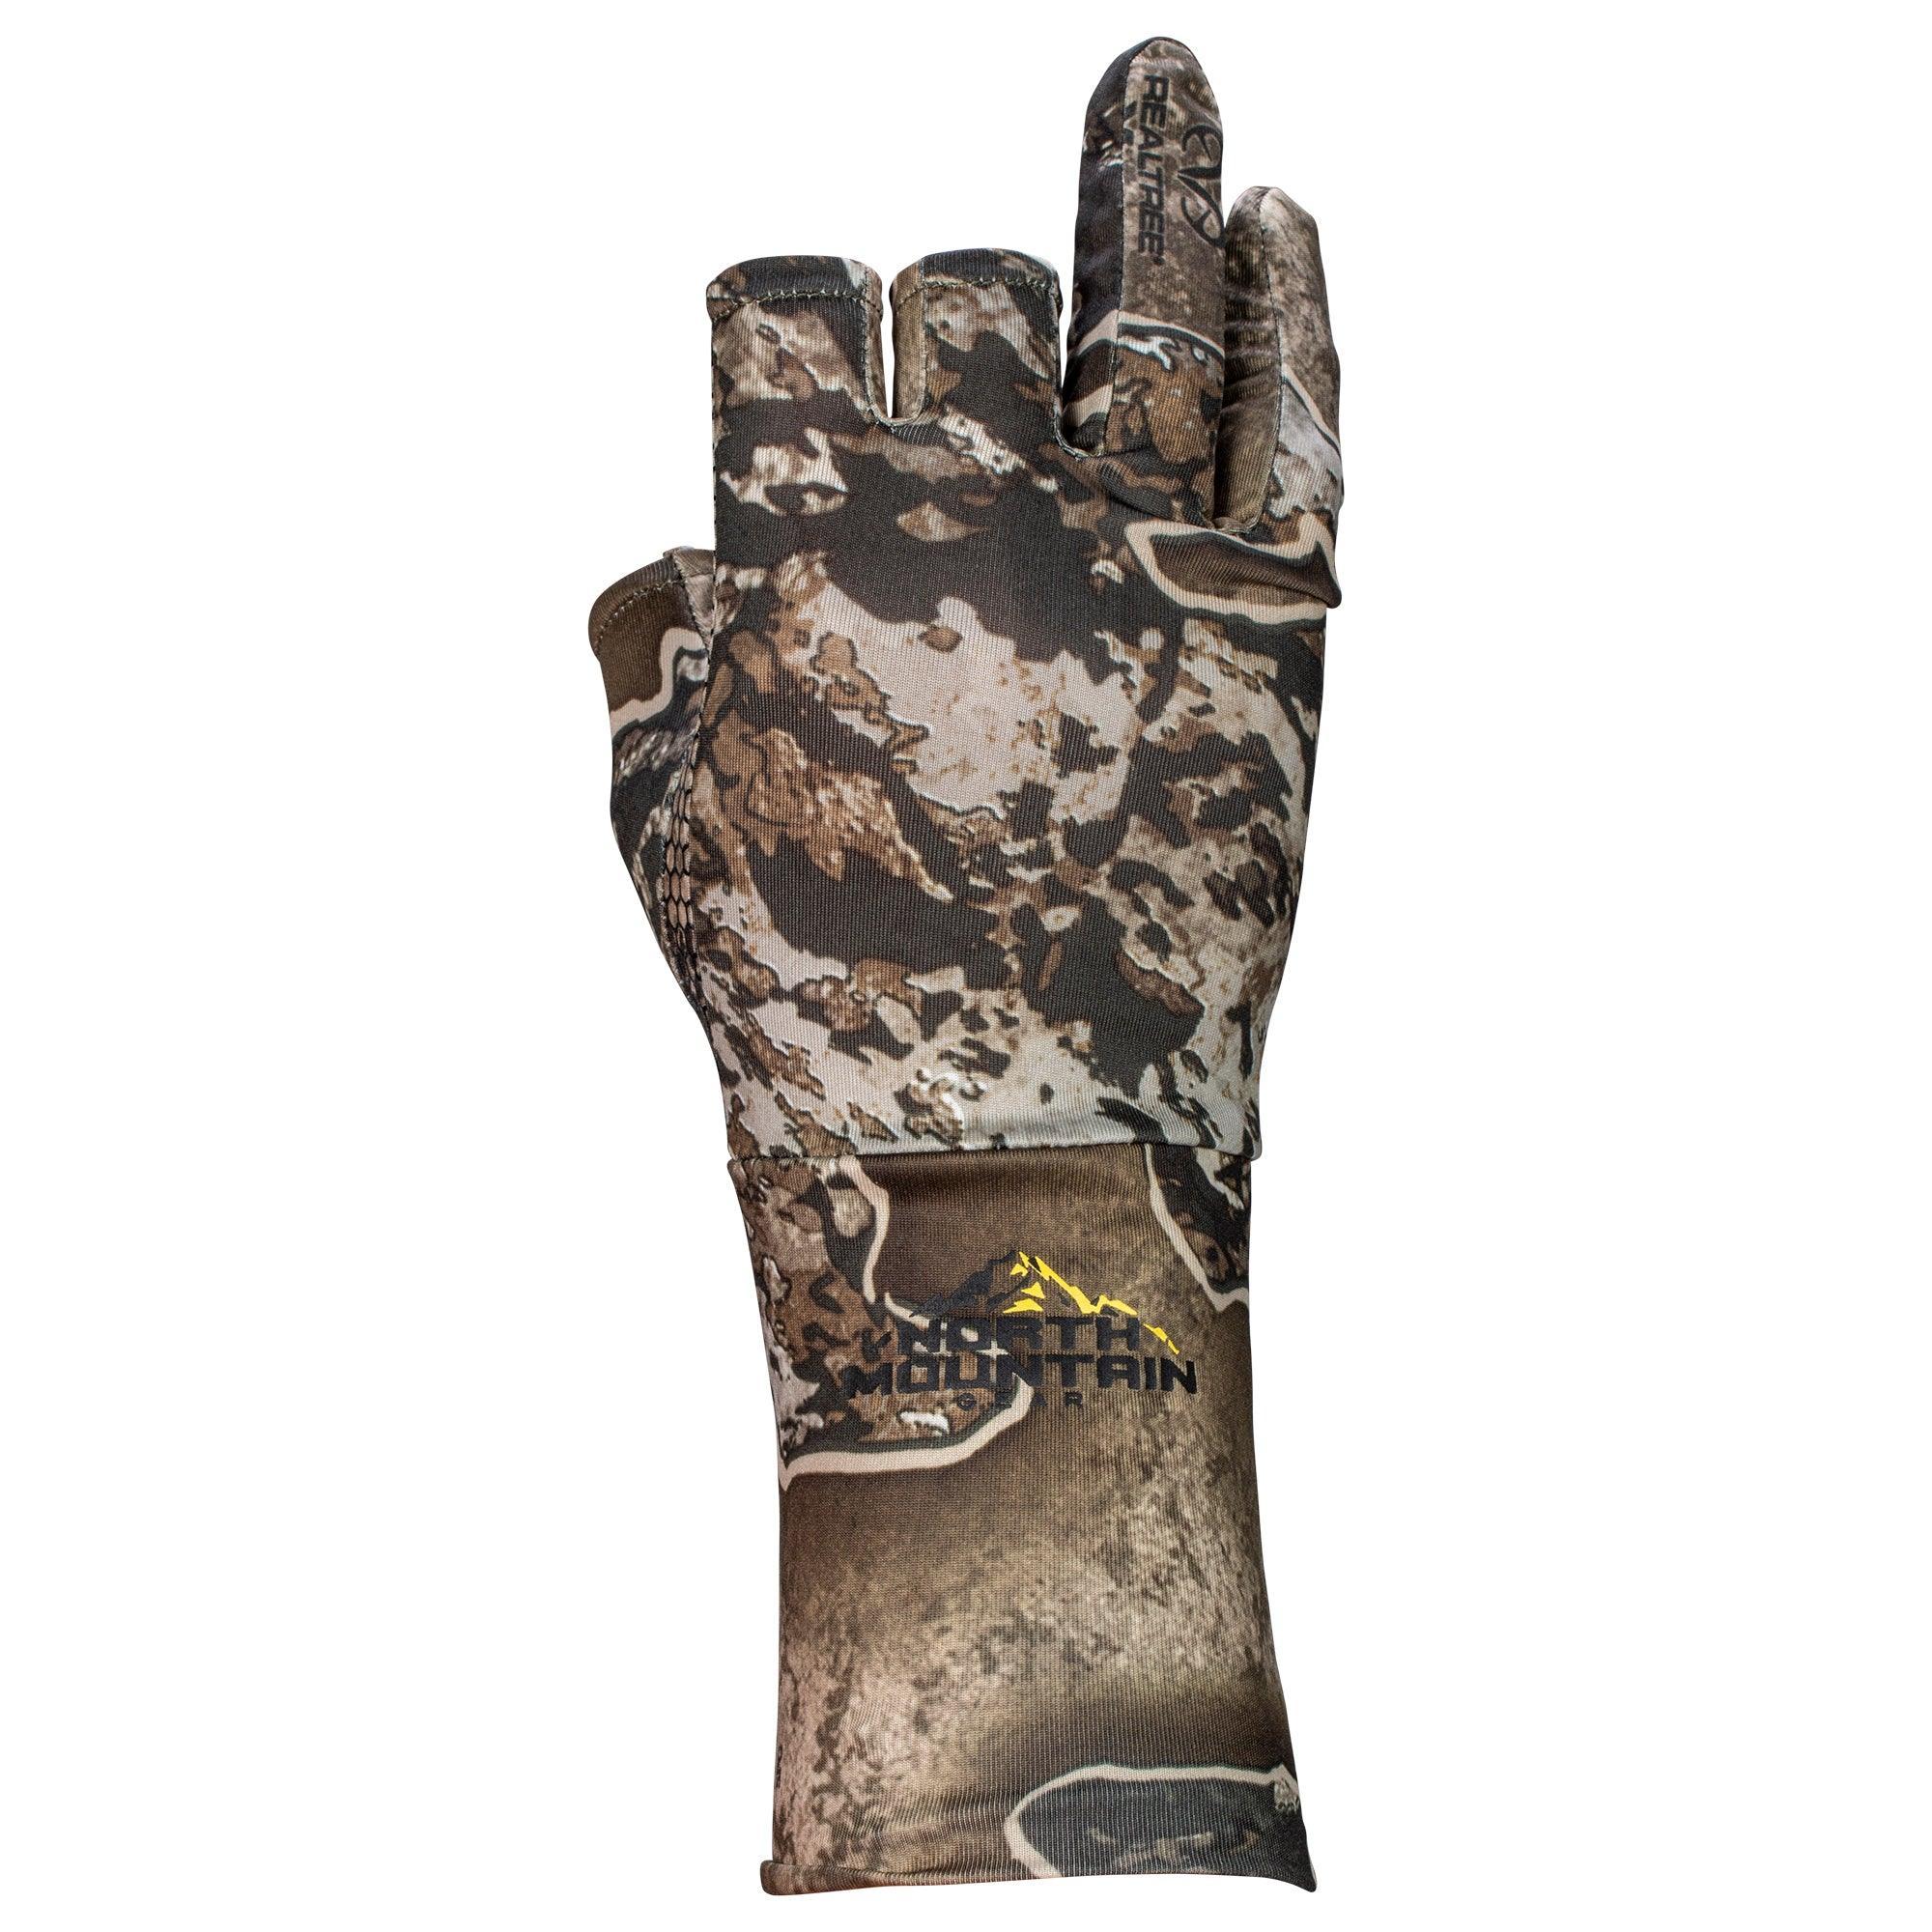 Realtree Excape Mens Lightweight Hunting Gloves, up Tanzania